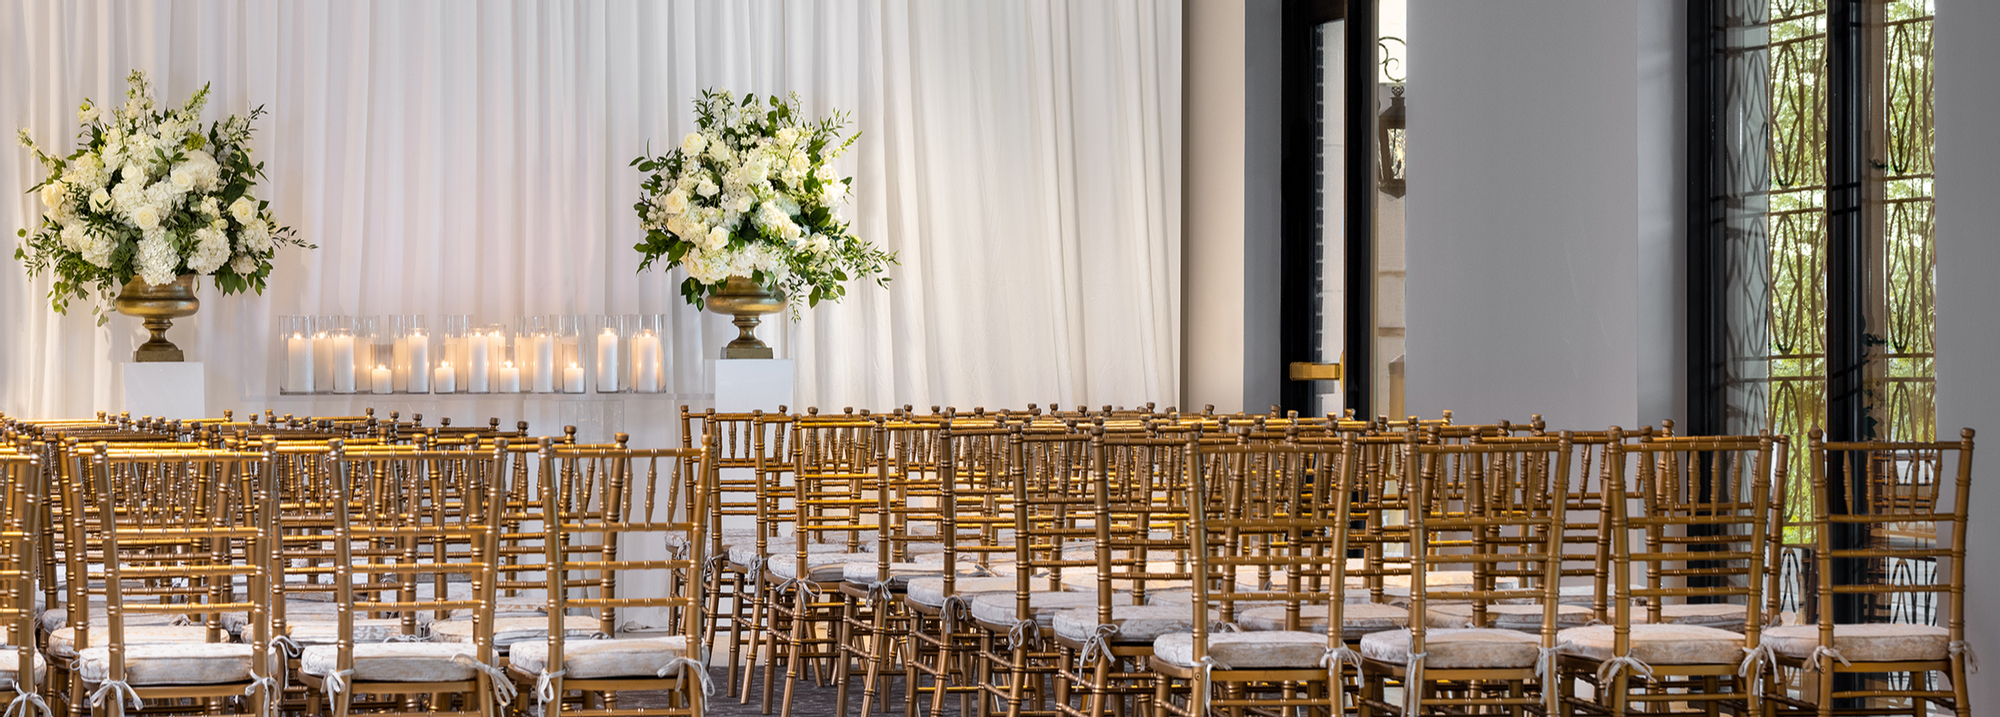 Chairs set up for a wedding reception at Warwick Melrose Dallas